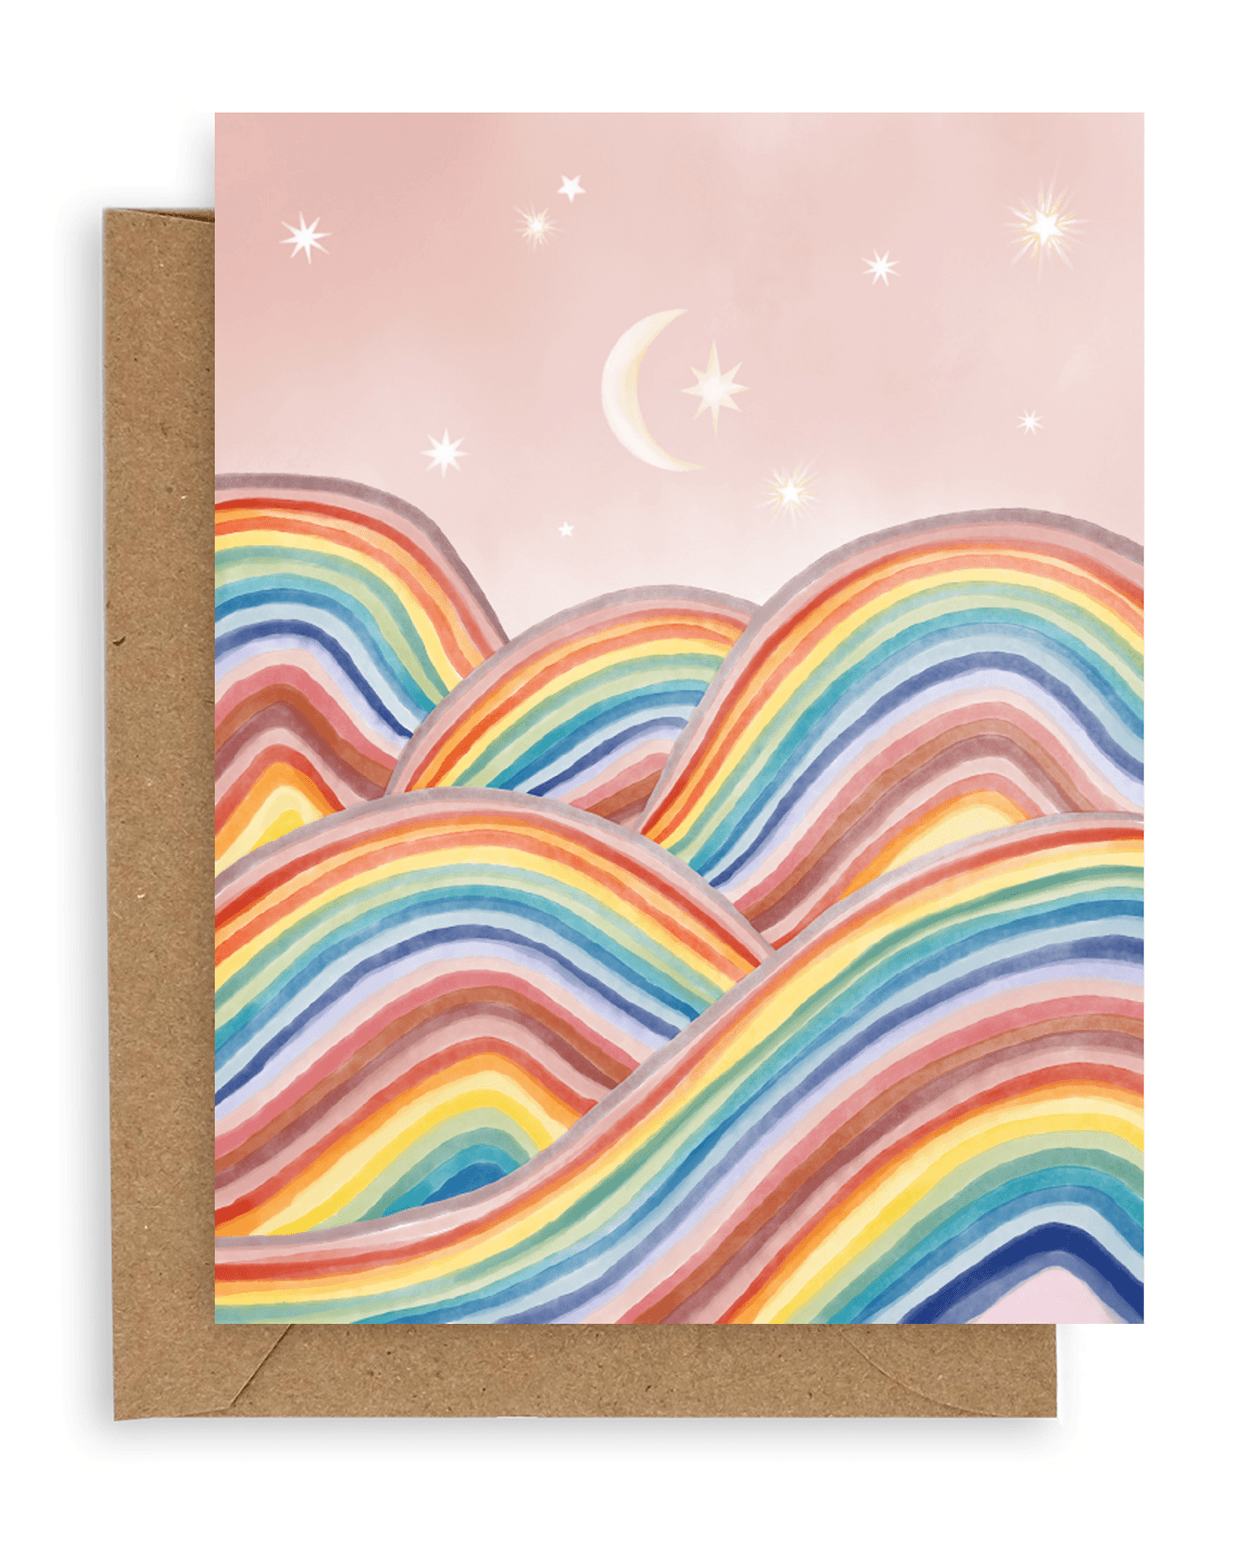 Landscape card with pink sky, moon, stars and rainbow mountains. Shown with kraft envelope. 